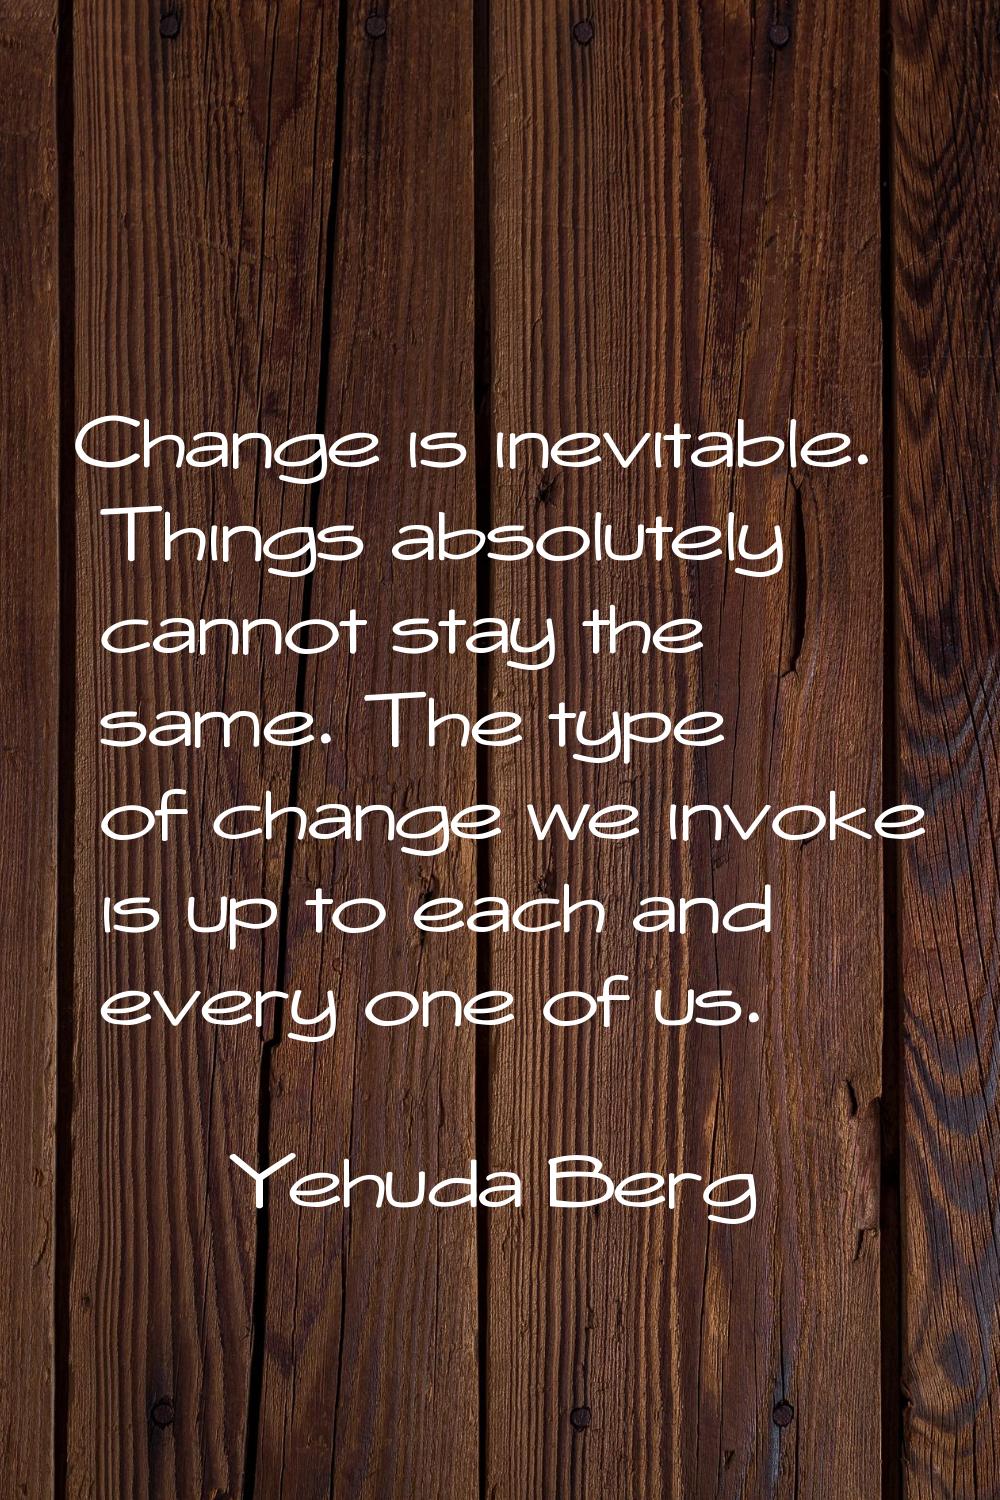 Change is inevitable. Things absolutely cannot stay the same. The type of change we invoke is up to